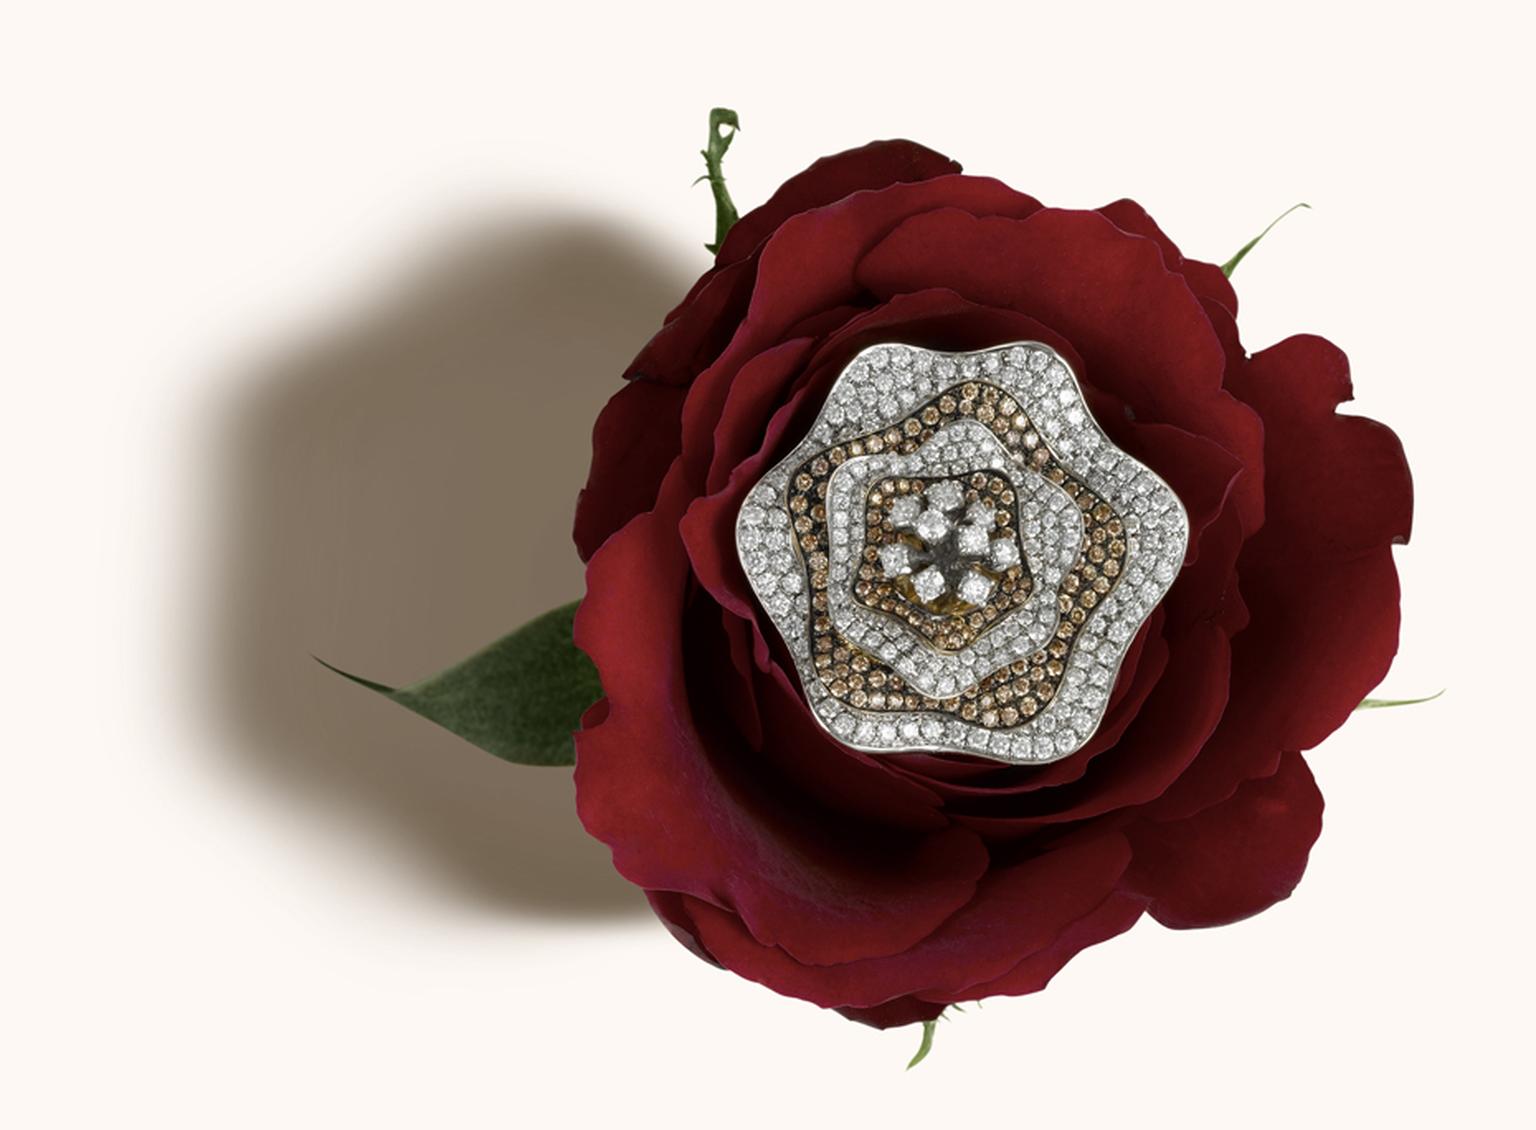 Zoya Espan~a collection exotic rose brooch with champagne and white diamond petals